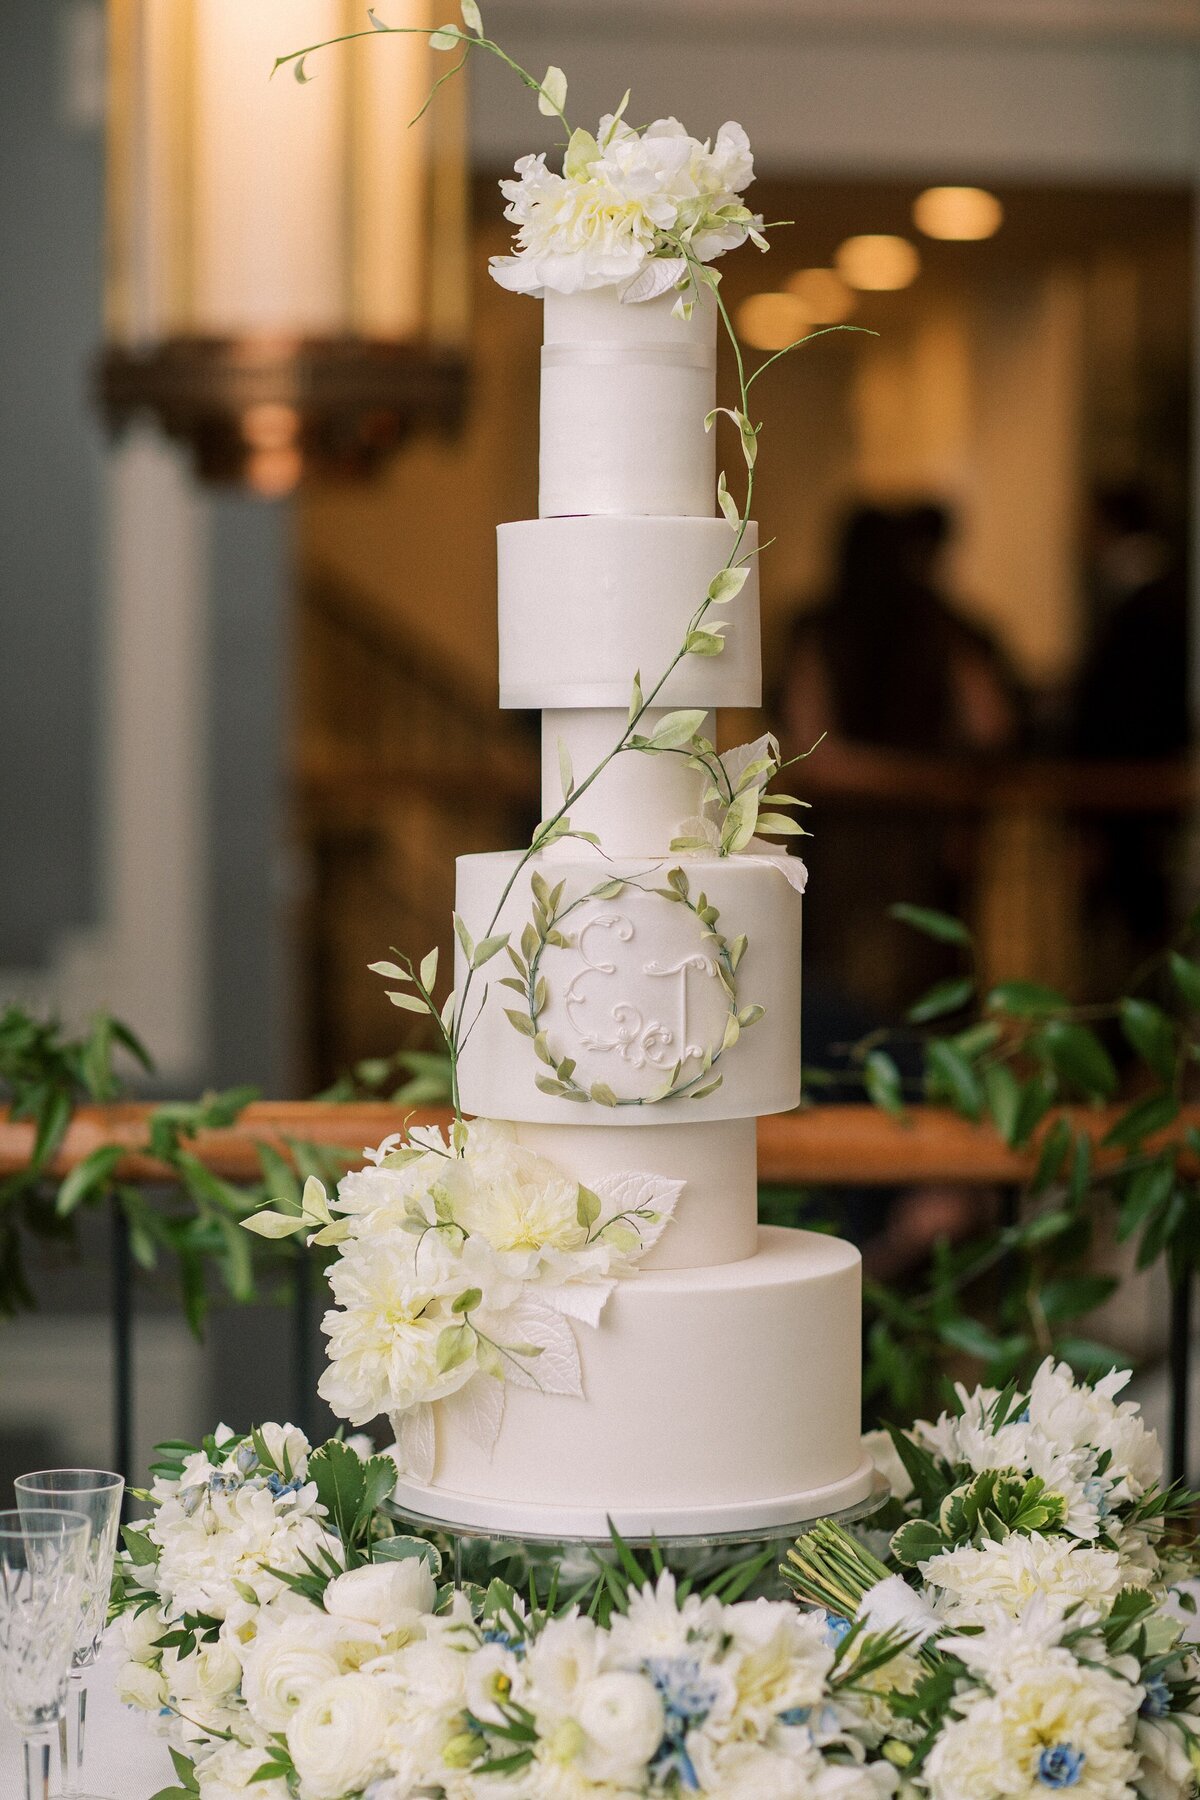 Sophisticated tiered wedding cake